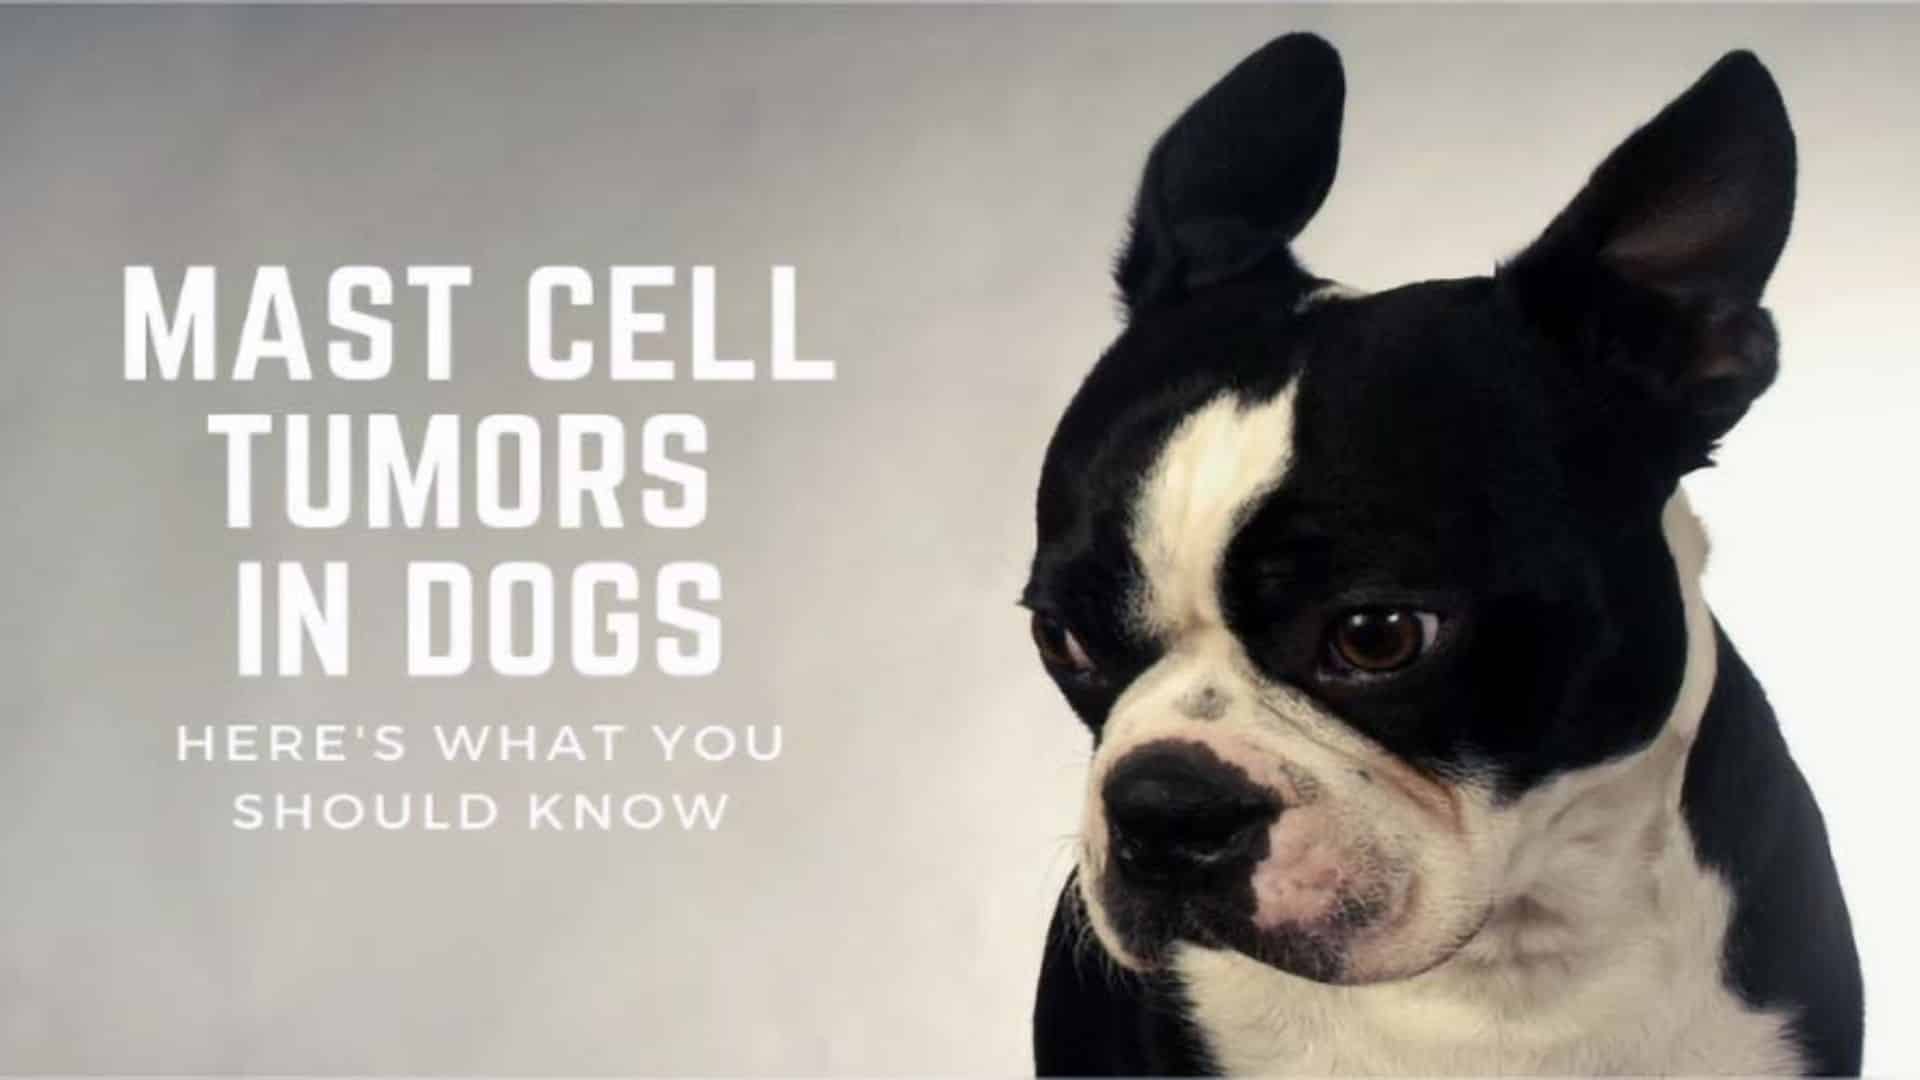 Mast Cell Tumors in Dogs Heres What You Should Know